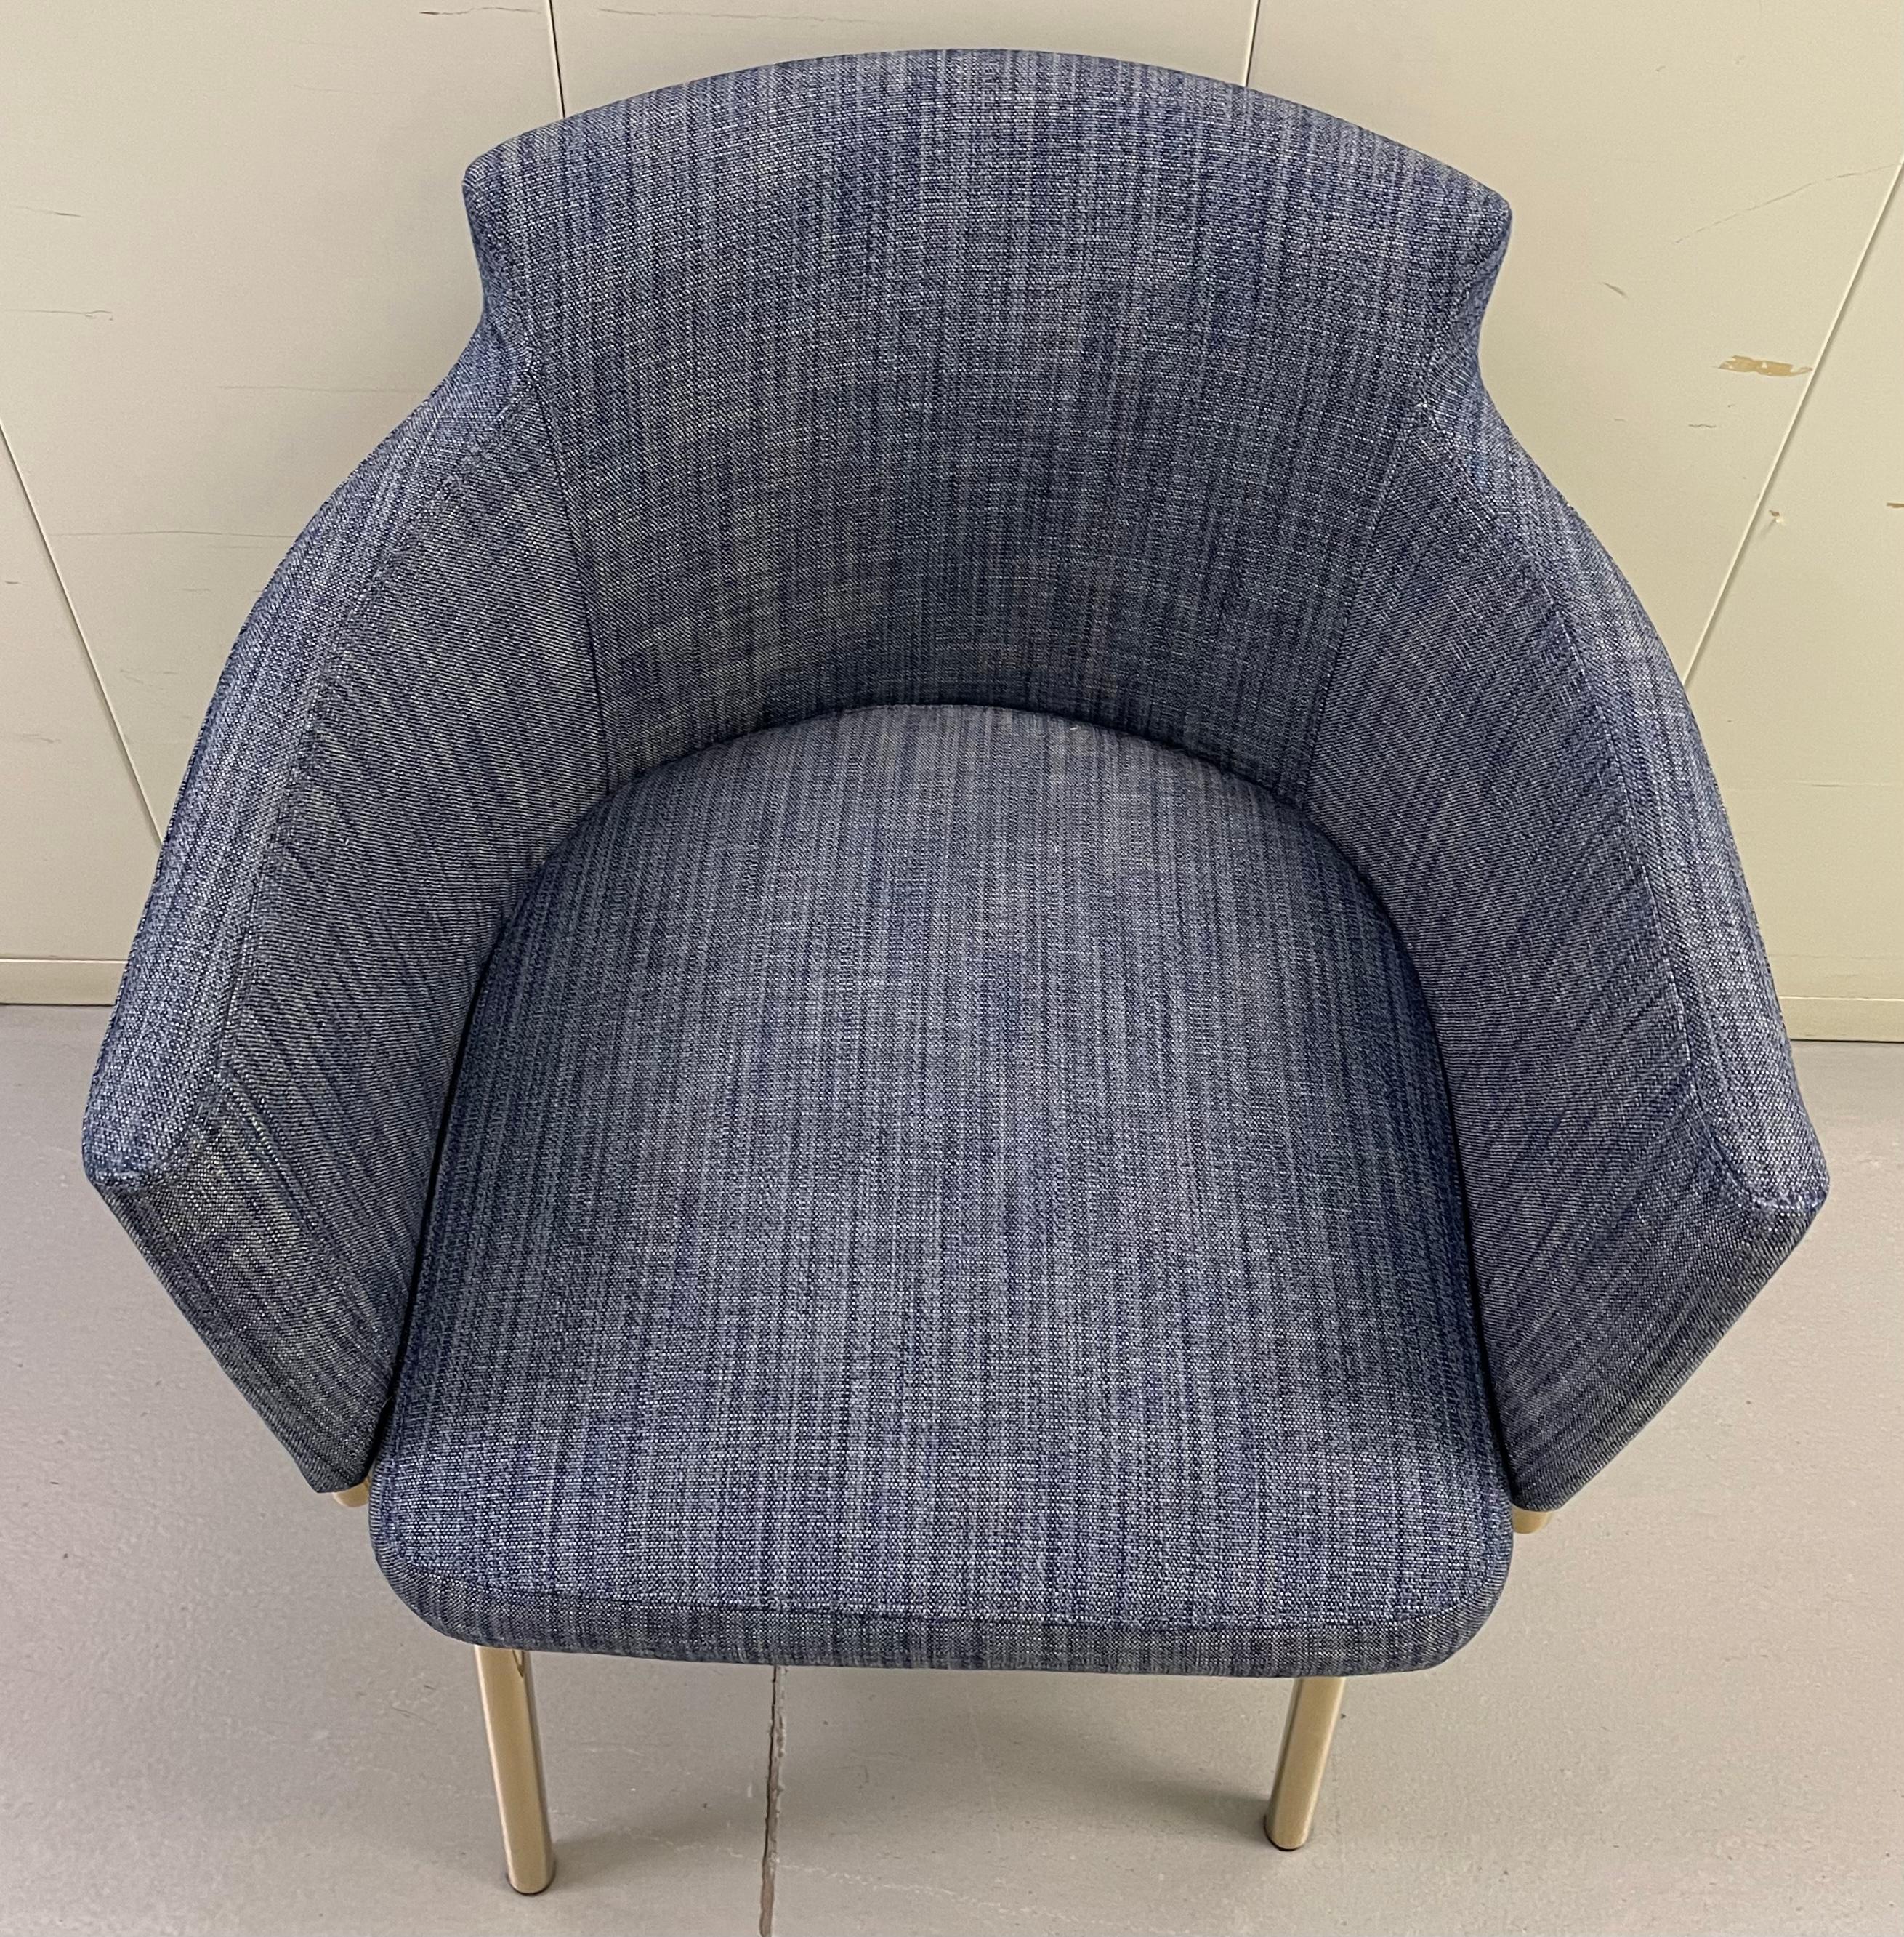 1970s polished brass swivel desk or vanity chair. Curved back detailing. Newly upholstered in Perennials performance woven fabric in dark blue colorway. Suitable for high traffic areas. 
Measures: Seat is 18